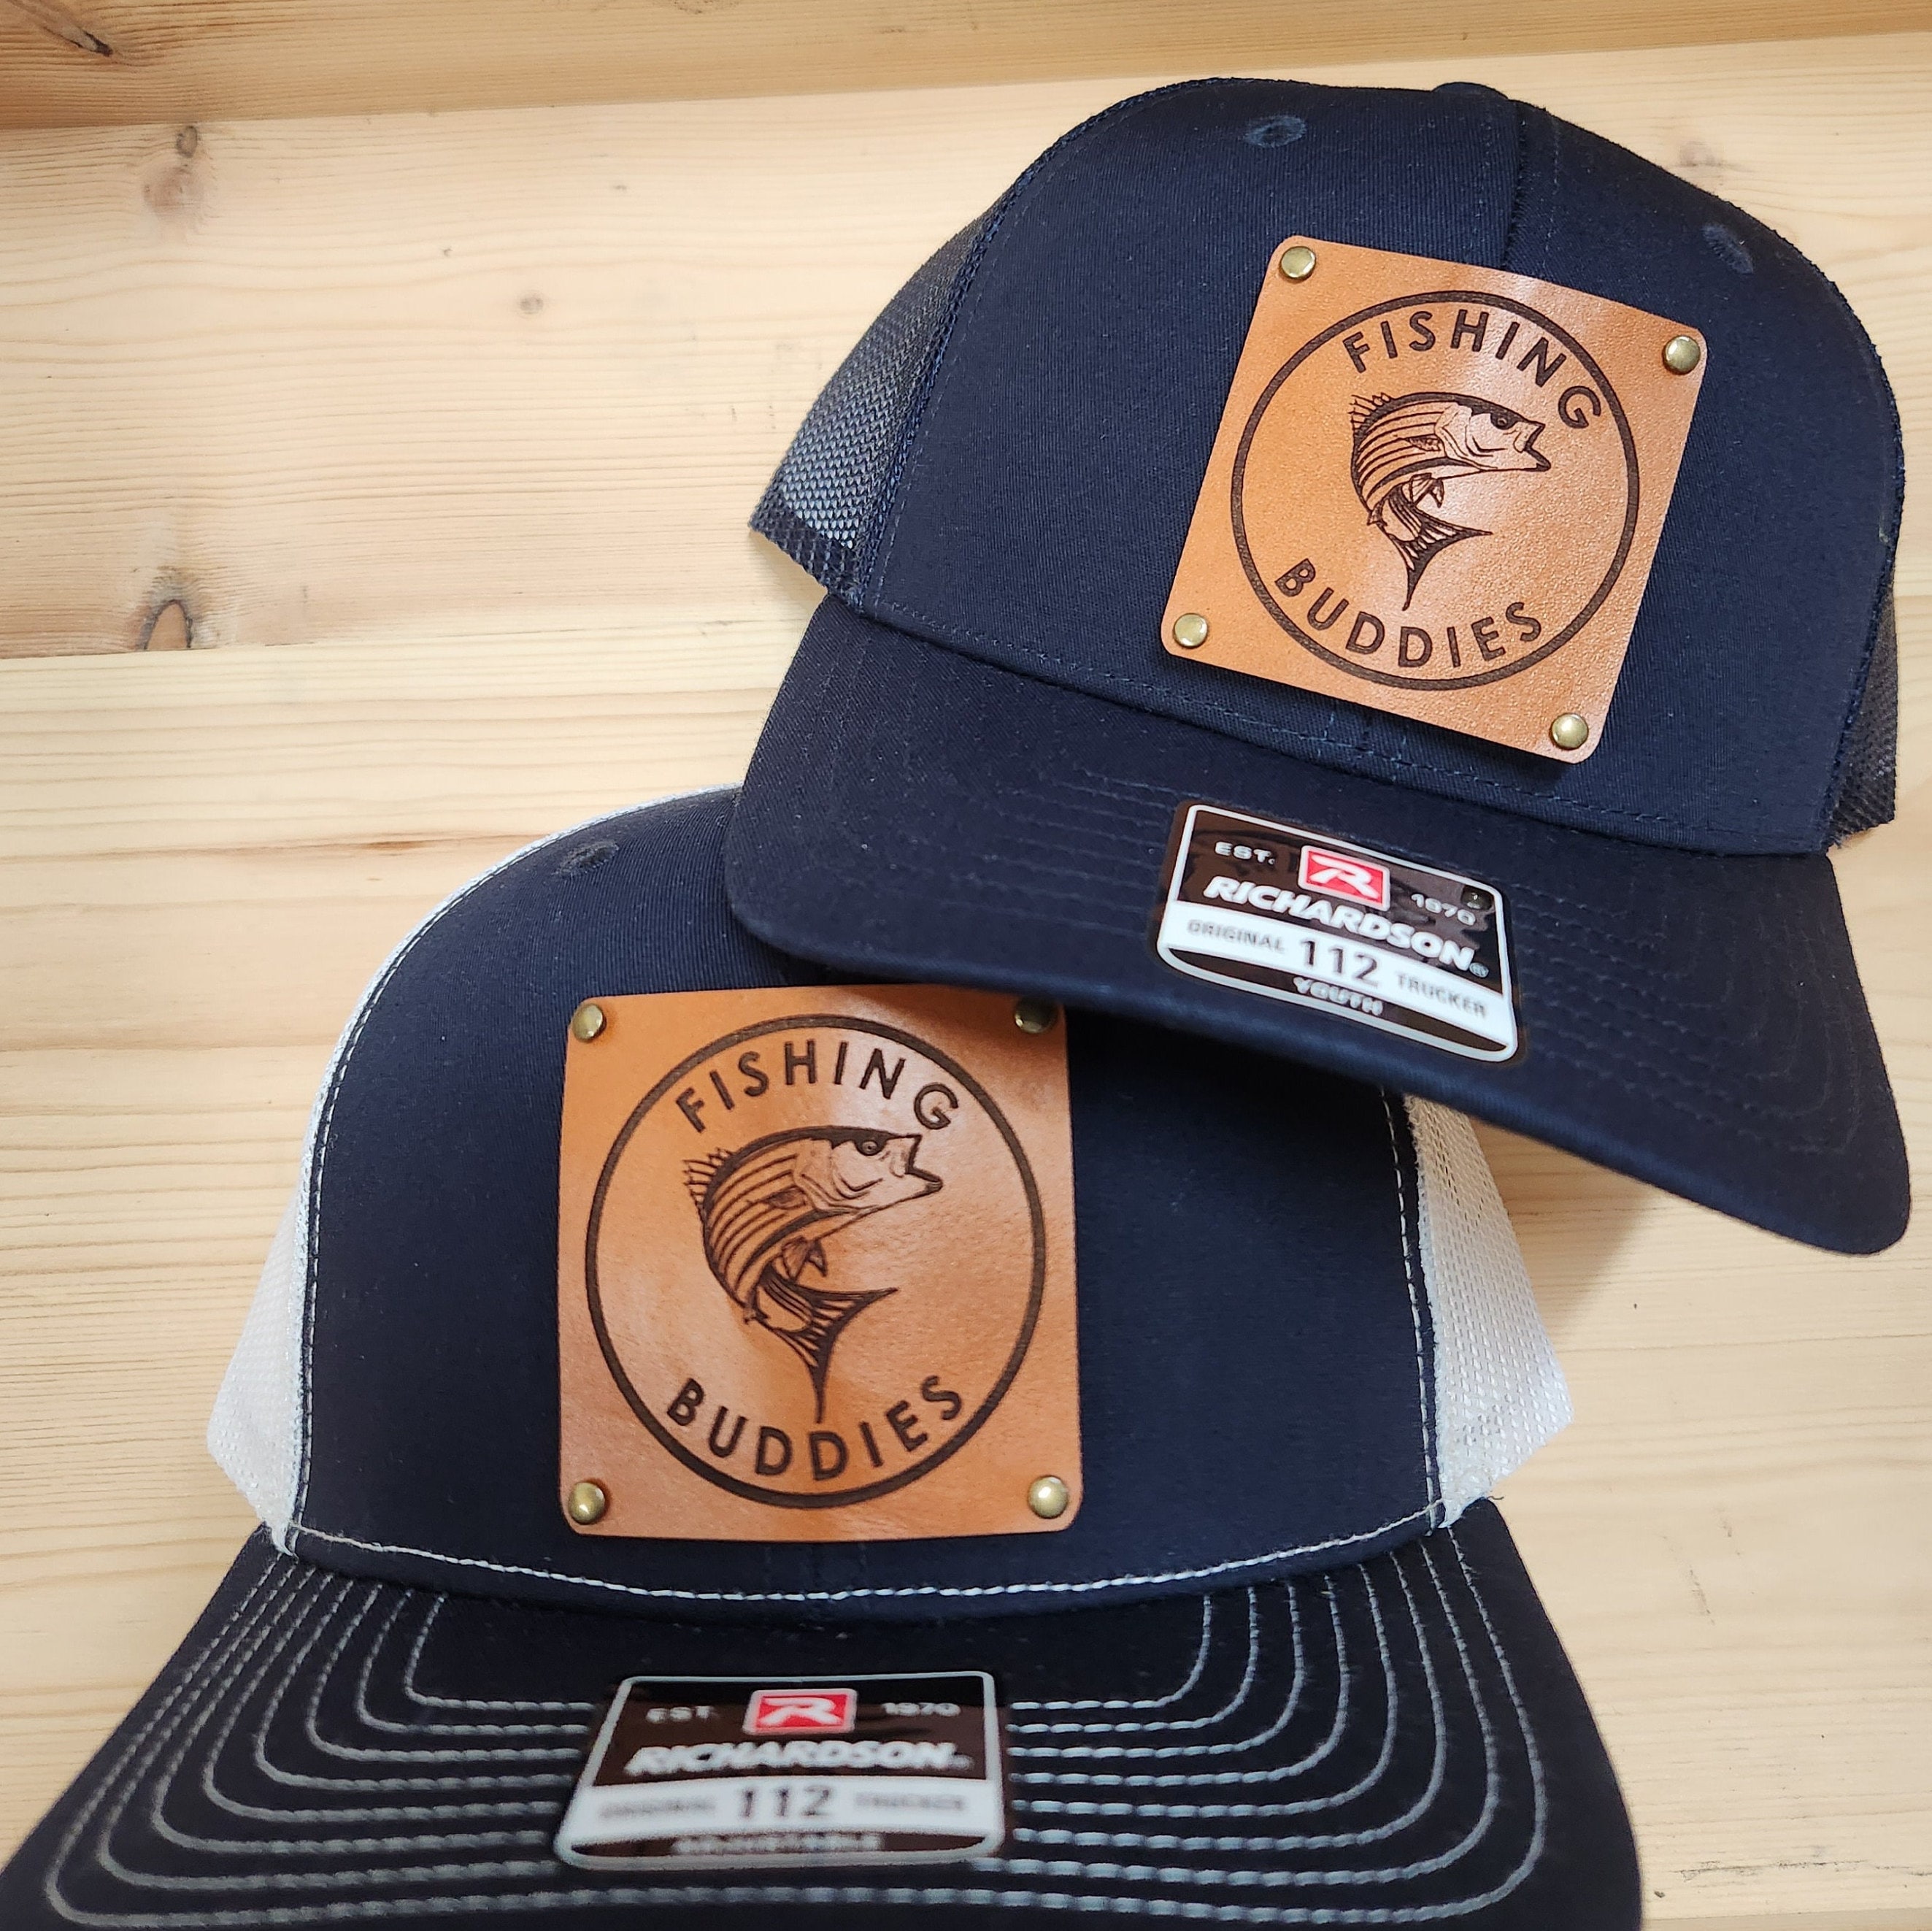 Fishing Buddies Hat Set Fishermen Hats for Adult and Child Richardson  Engraved Patch Hats Angler Hats for Dad or Mom and Buddy -  UK